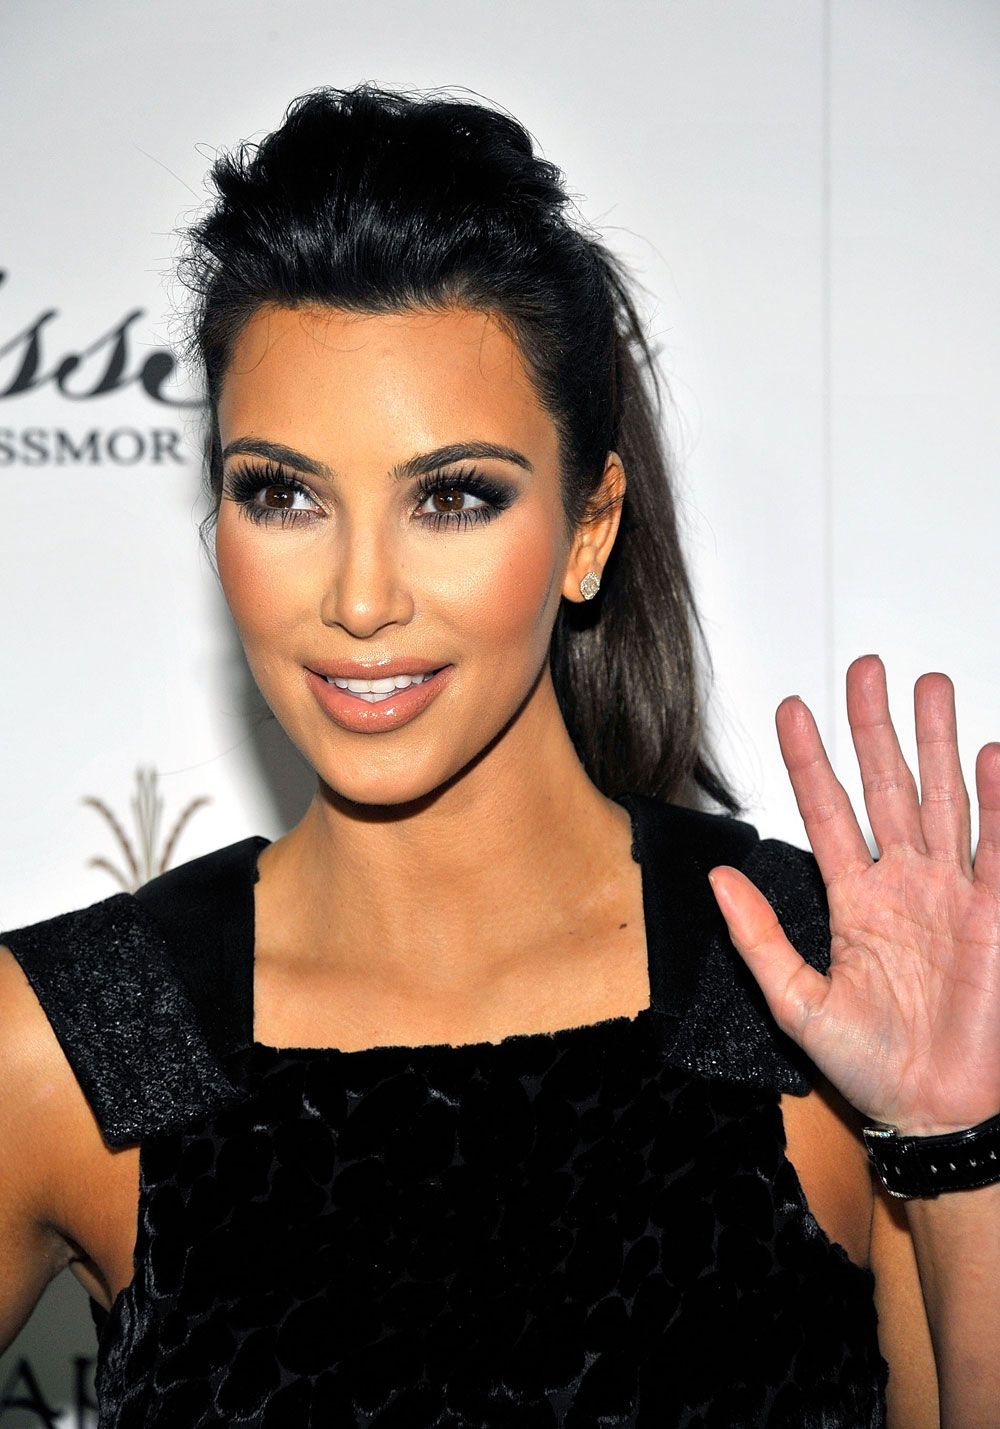 Baking The YouTube makeup trend Kim Kardashian is so done with